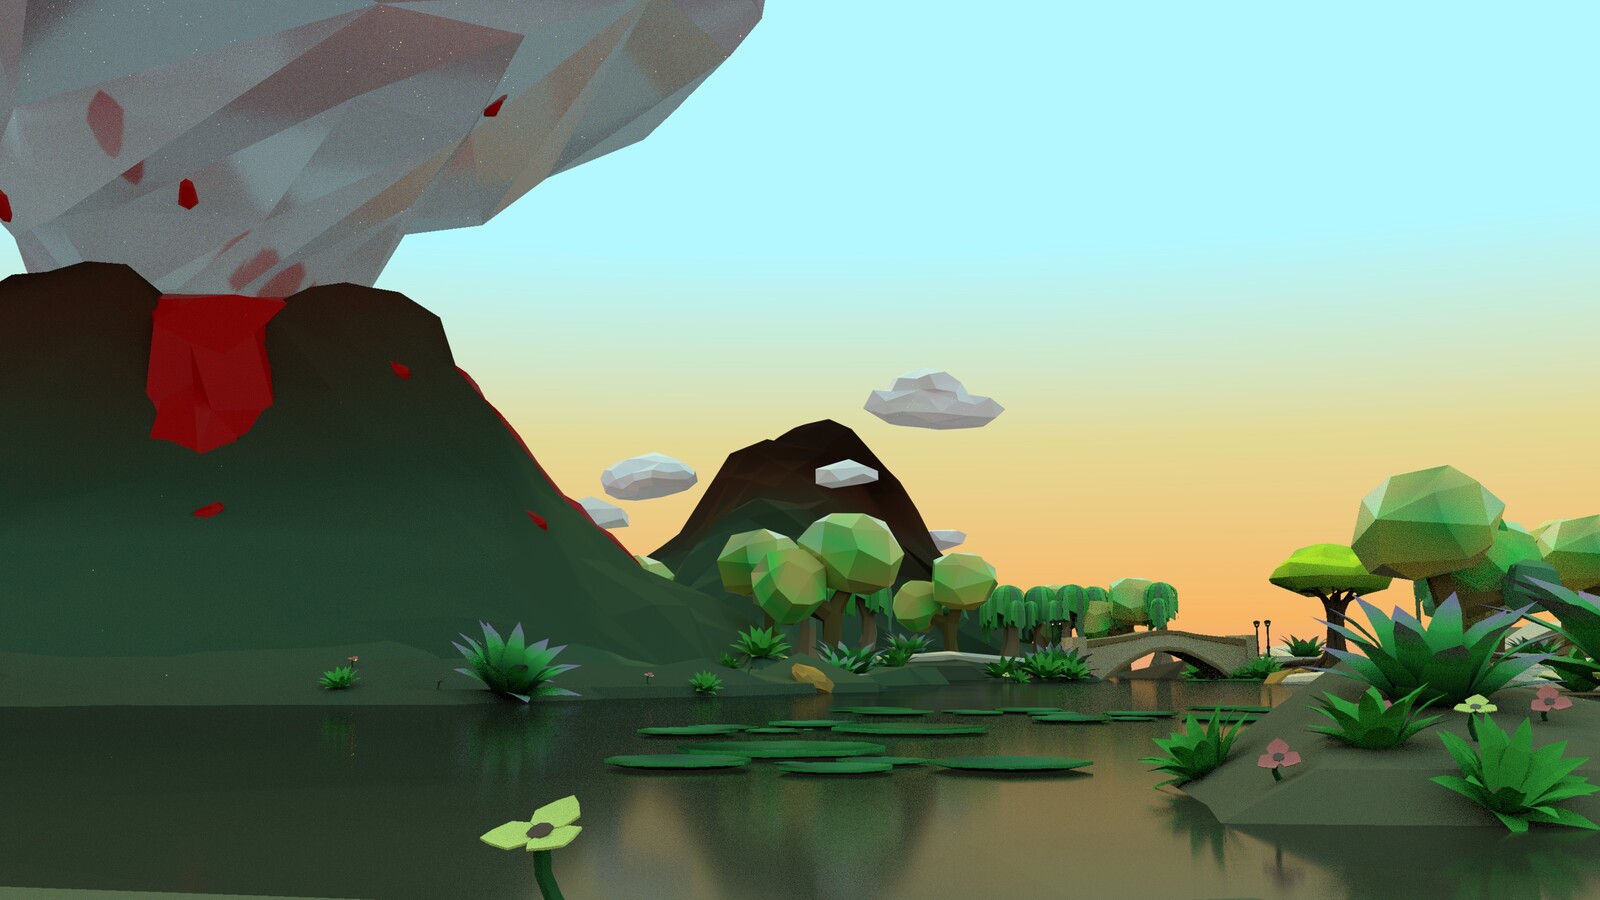 Low Poly Environment - Day and Night